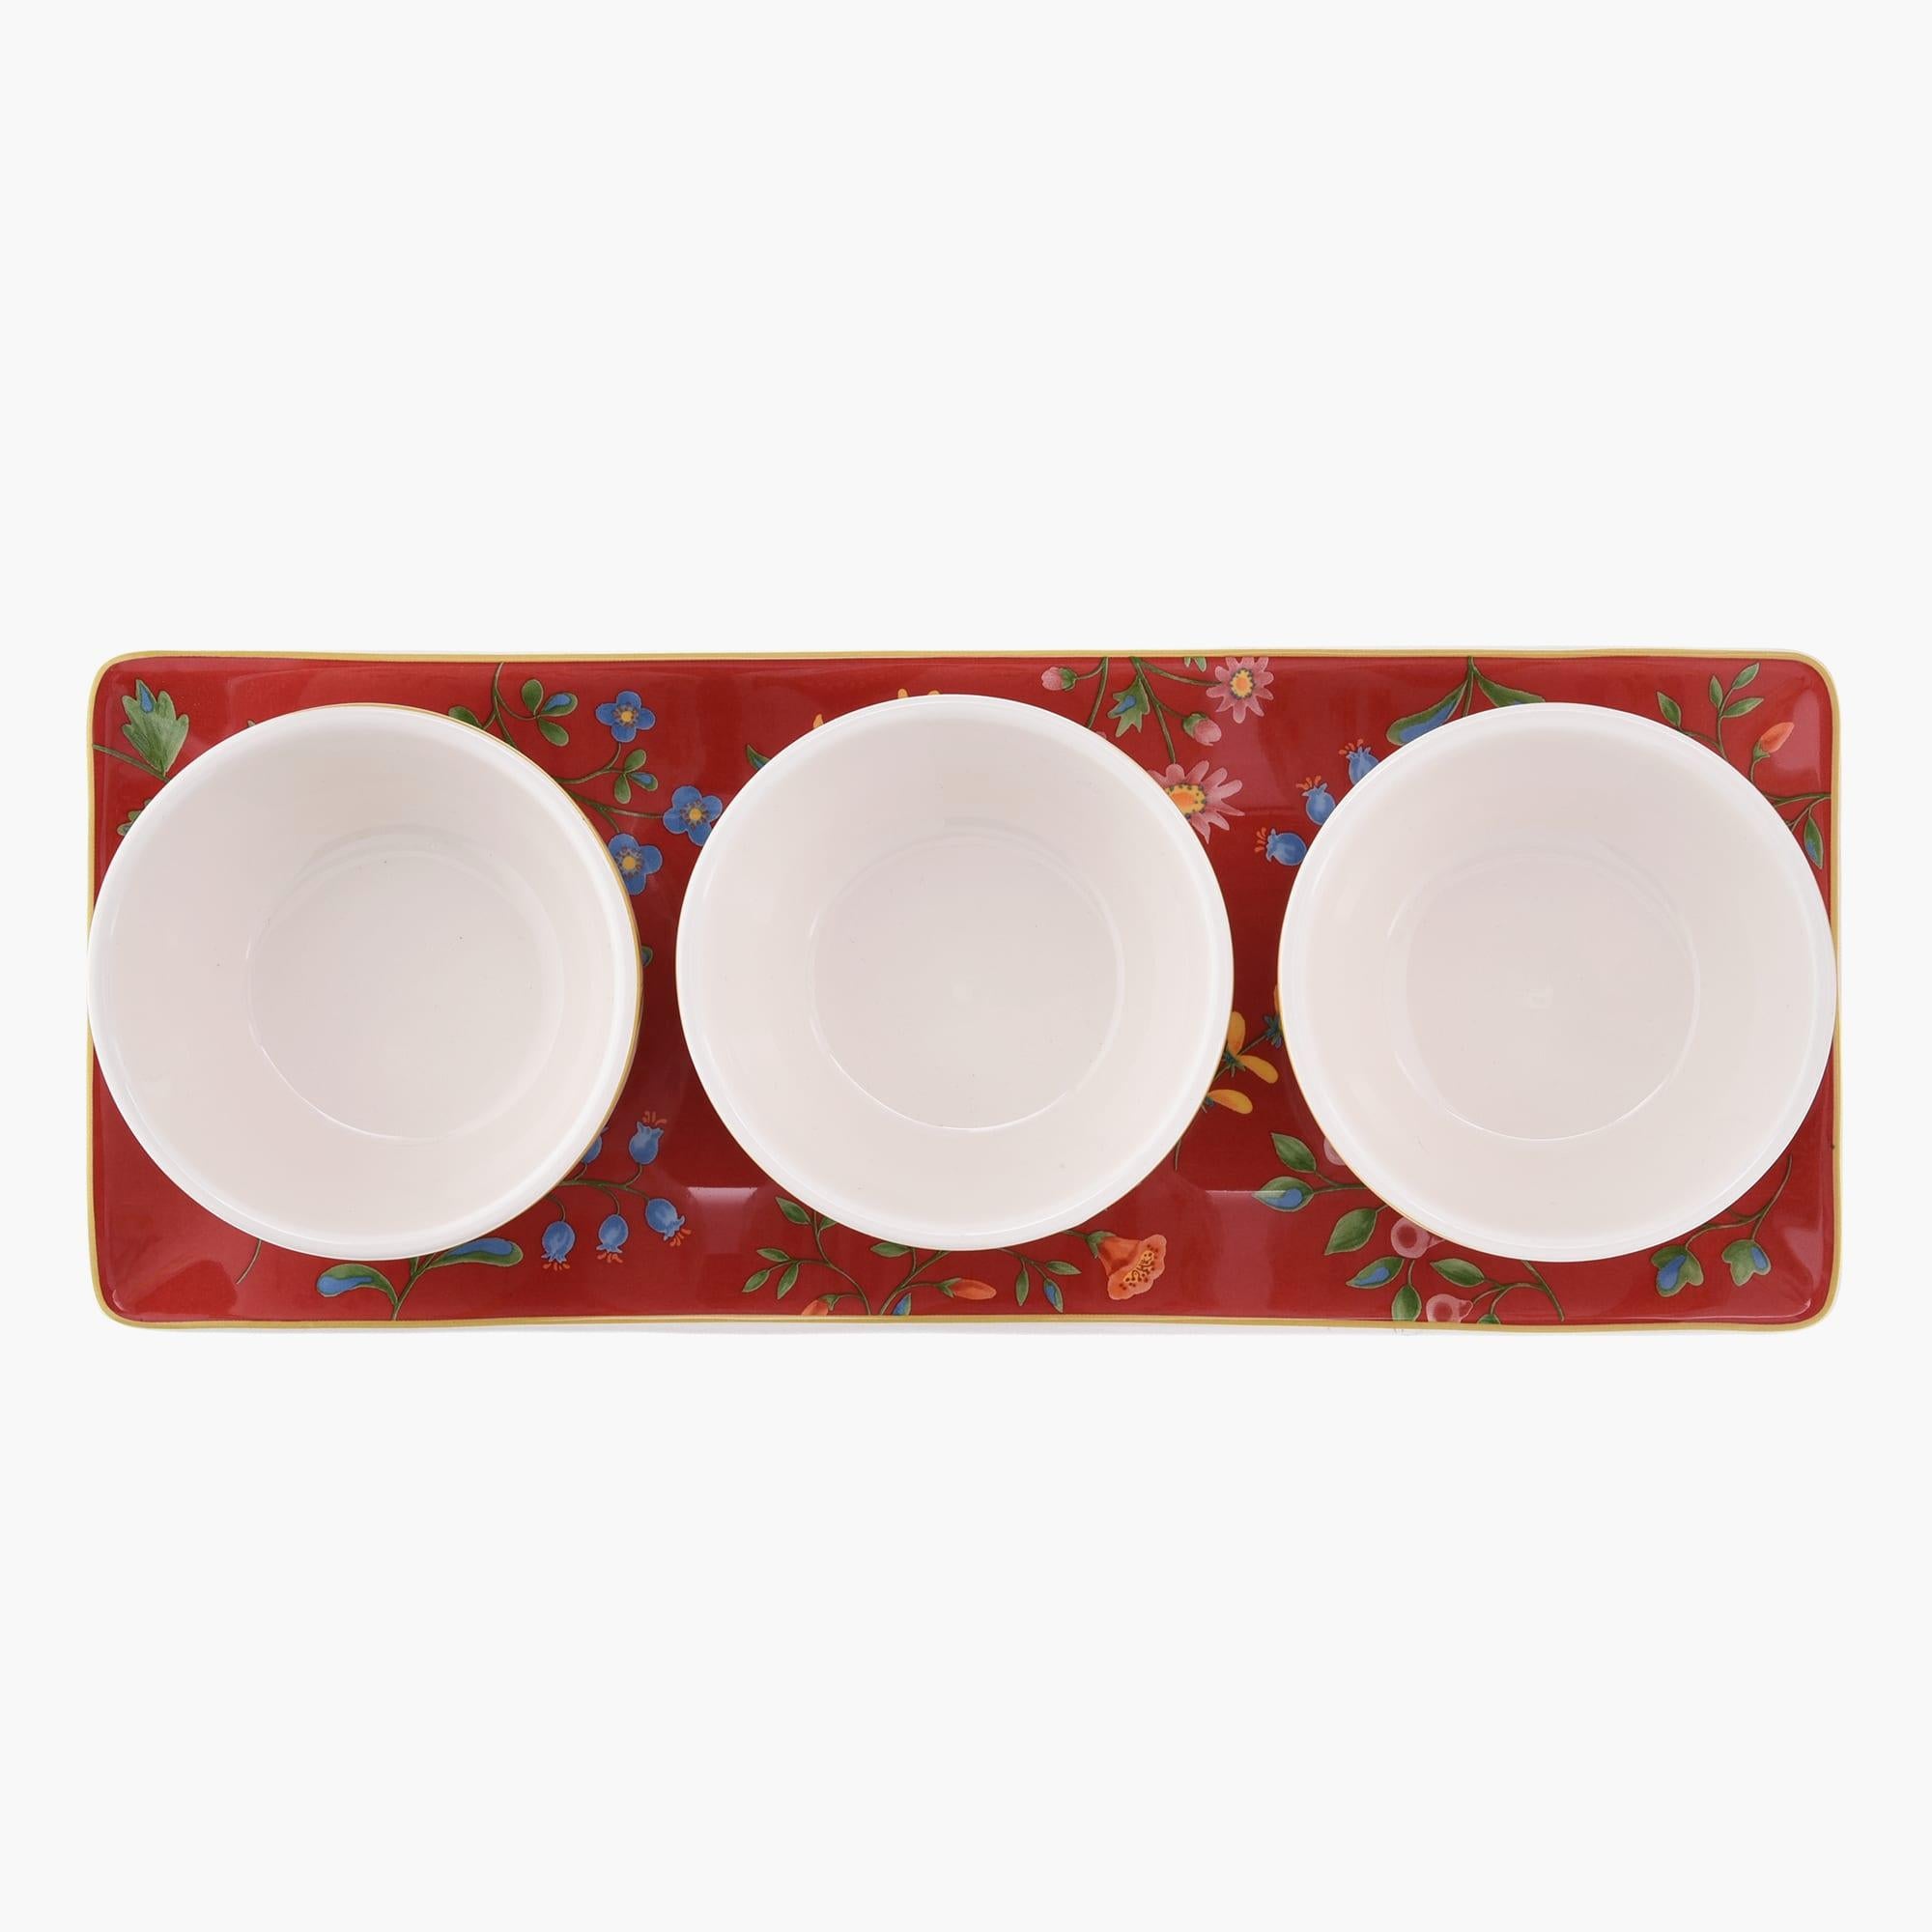 Folk Art Inspired Serving Bowls with Tray